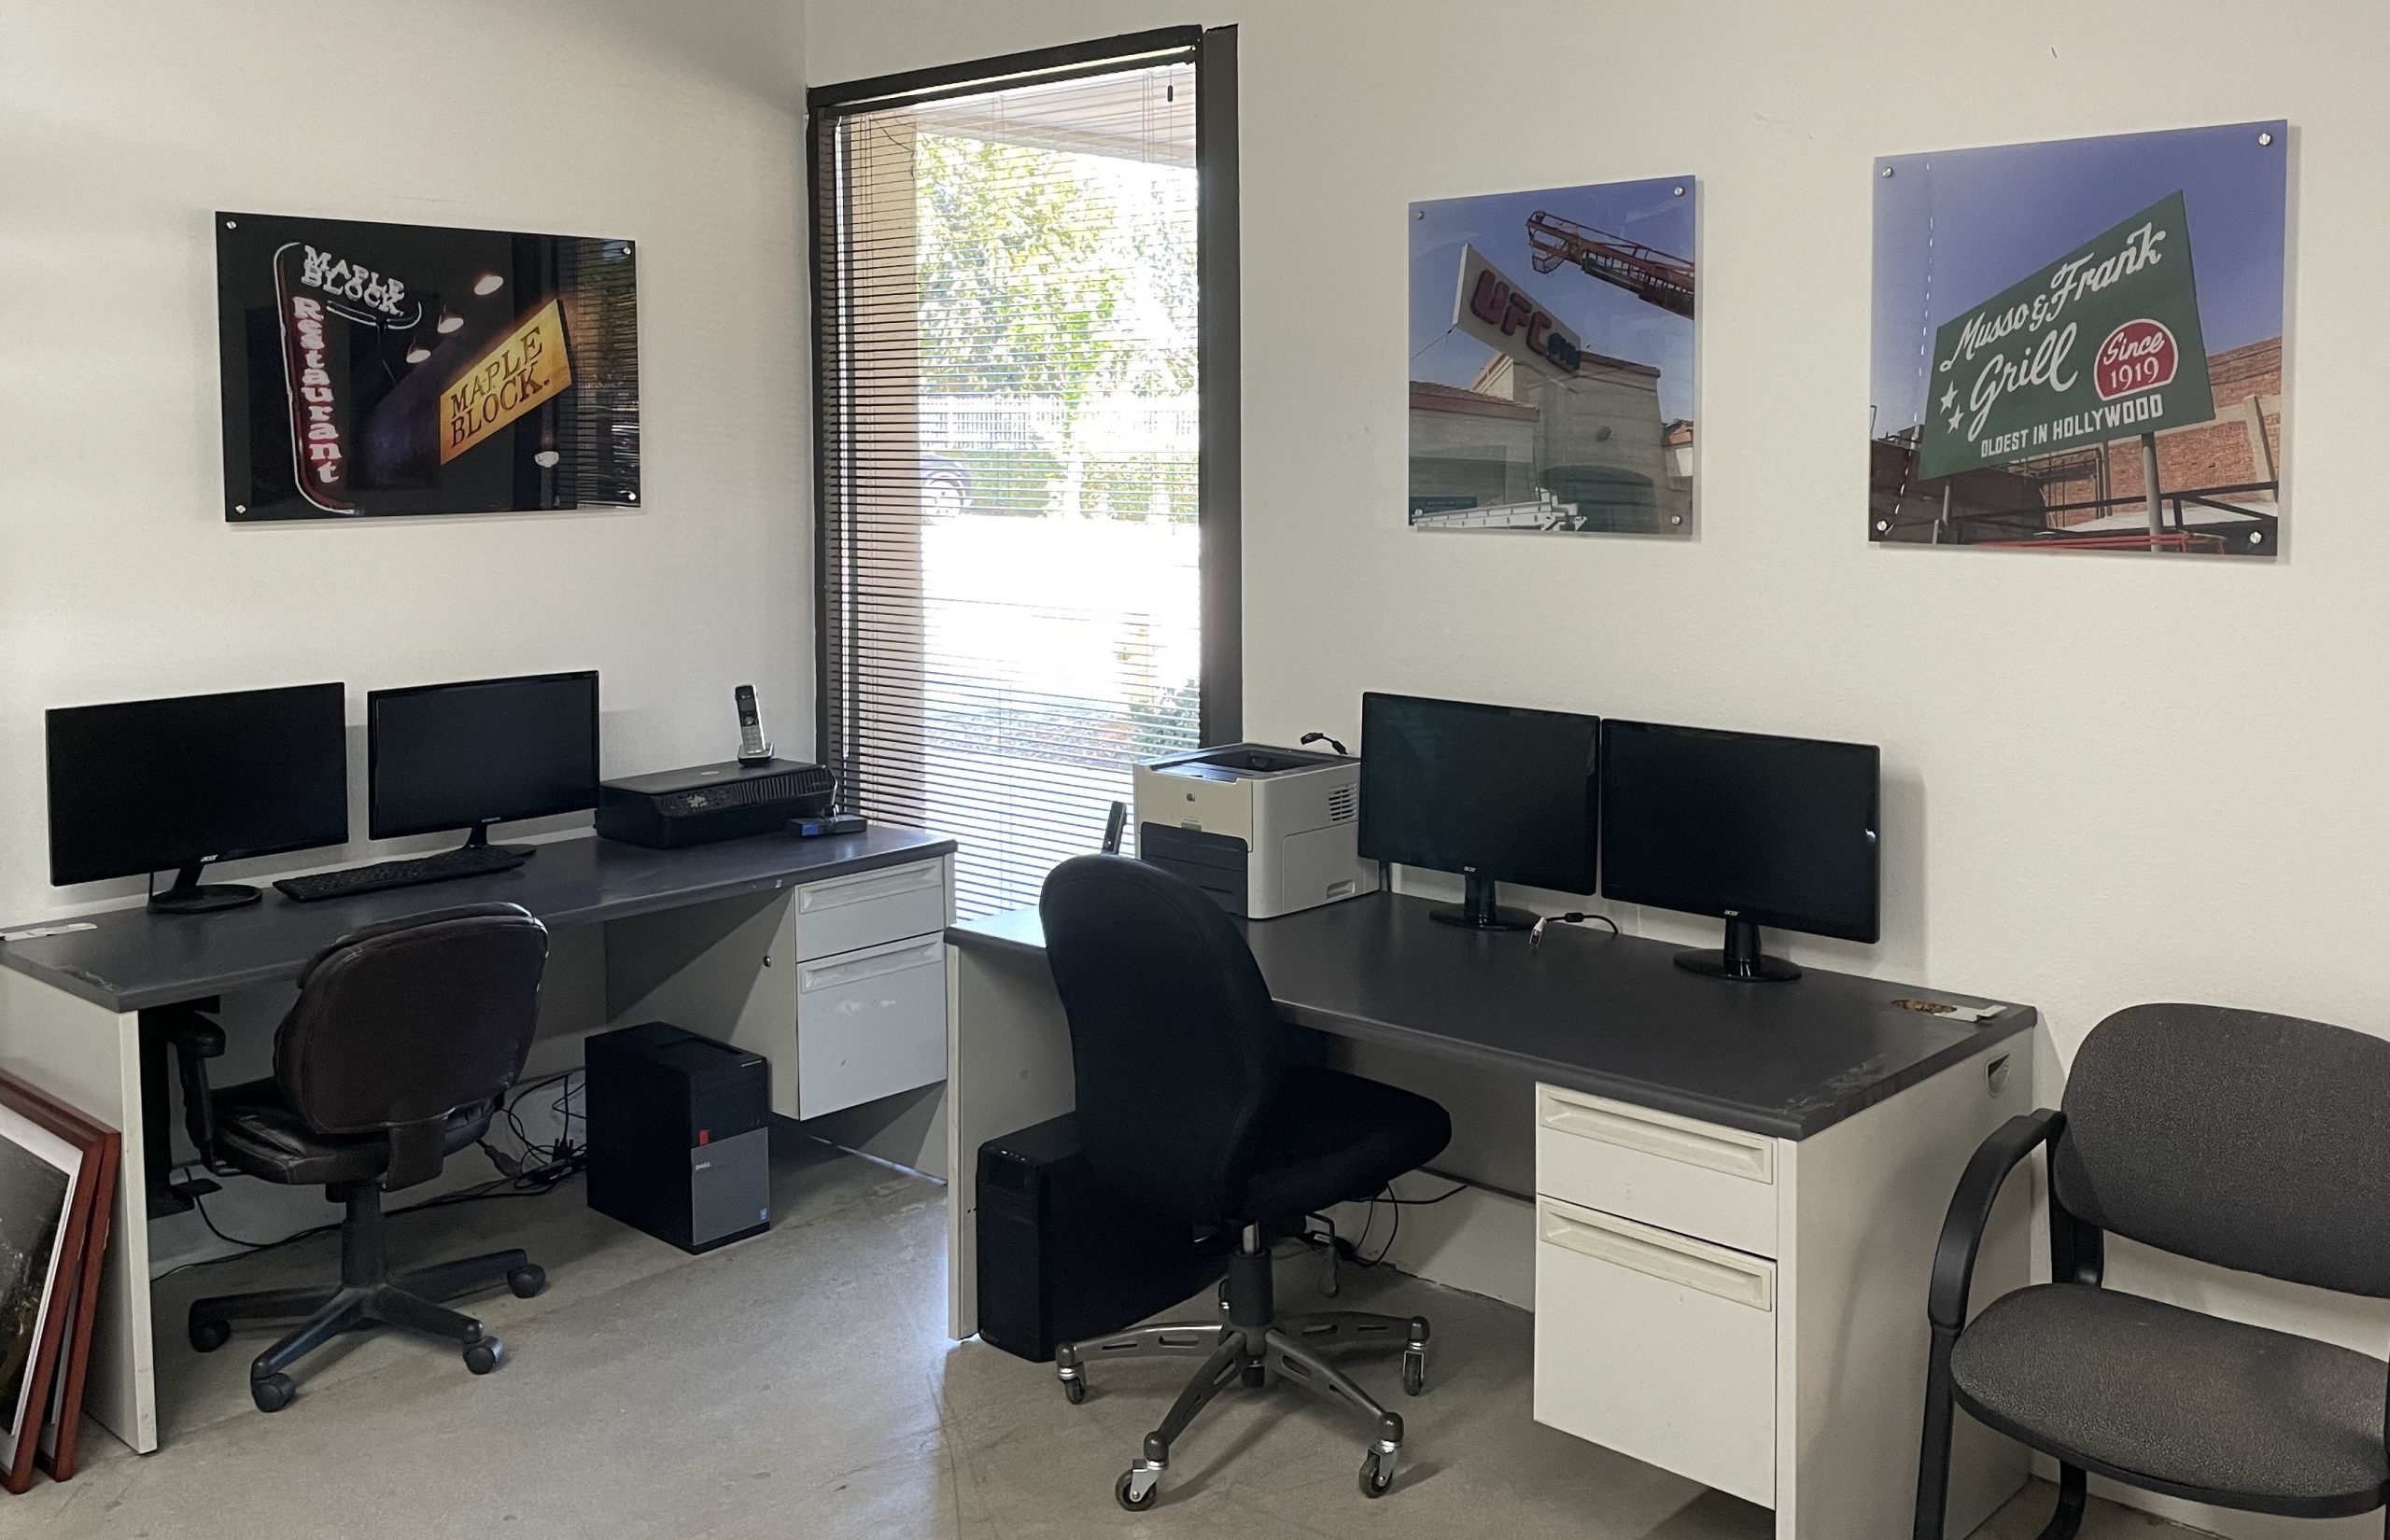 Remember a masterfully done project? Did an employee distinguish themselves? Commemorate these with custom office art signs. Like these acrylic prints of our projects.